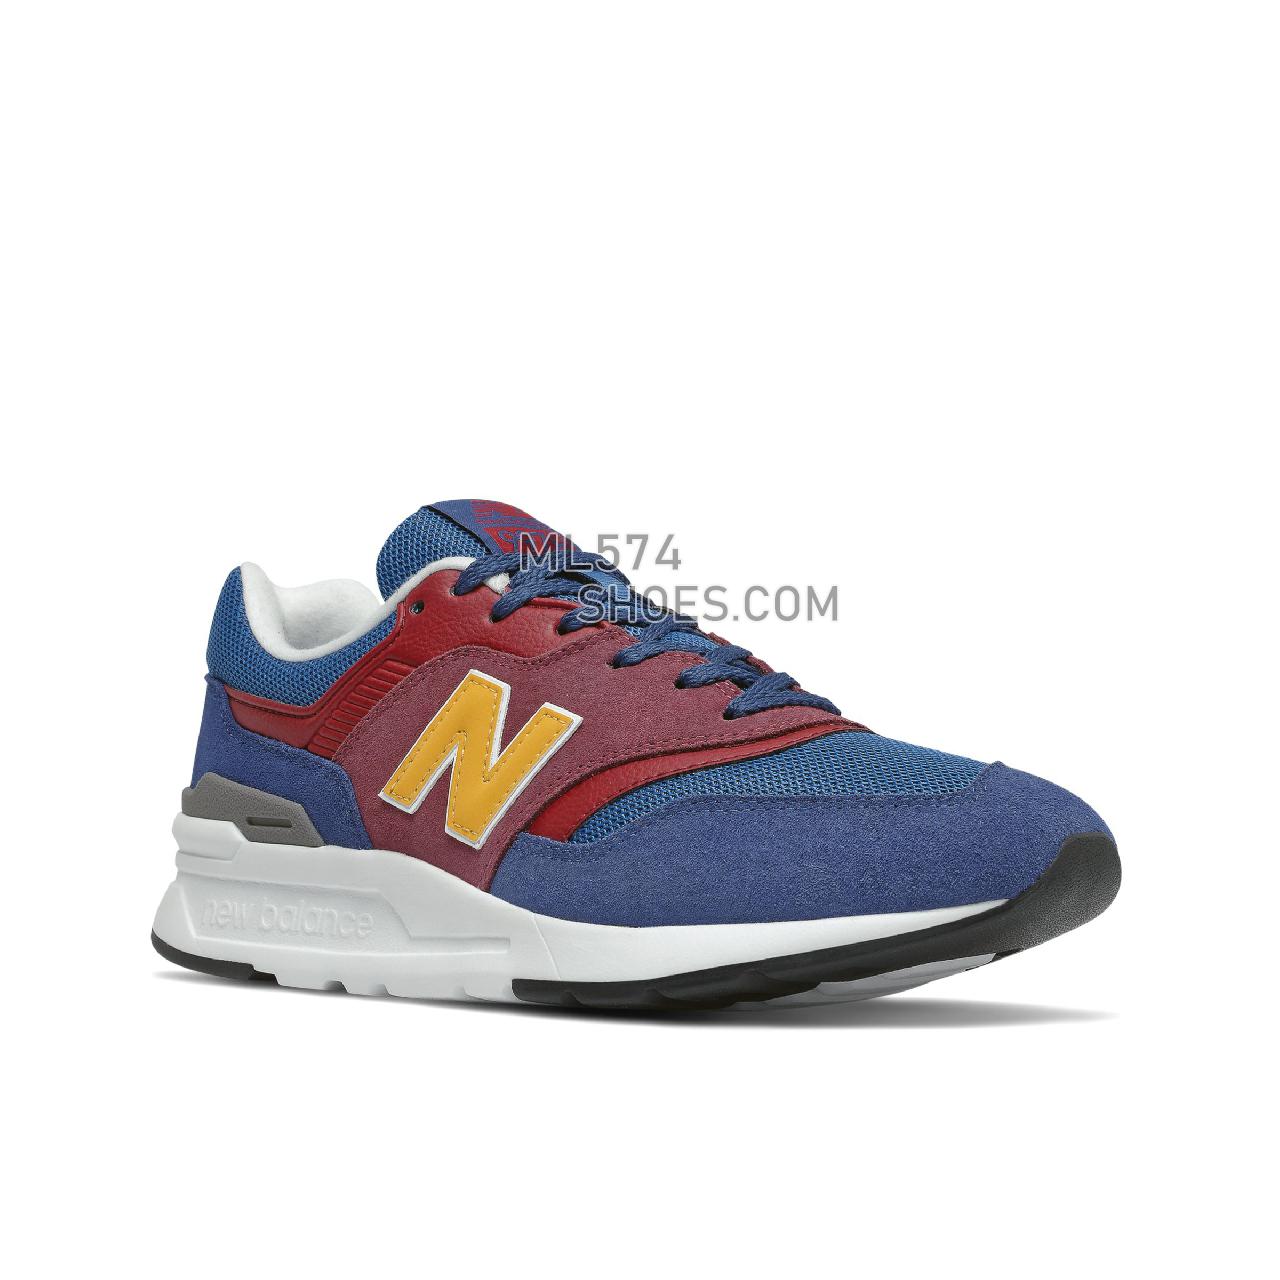 New Balance 997H - Men's Classic Sneakers - Burgundy with Navy - CM997HVM